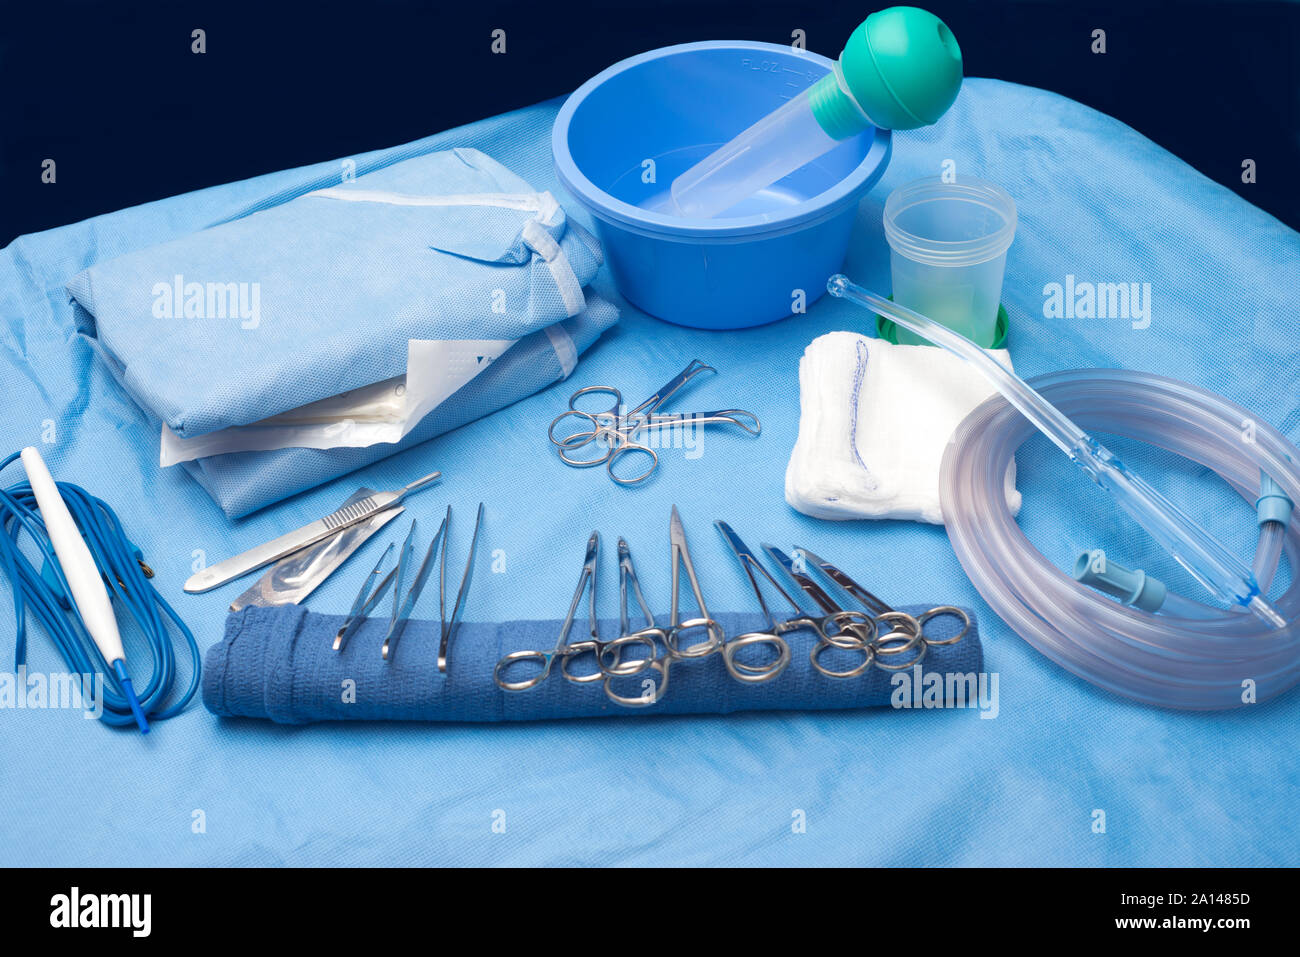 Surgical table with sterile drape and instruments. Stock Photo